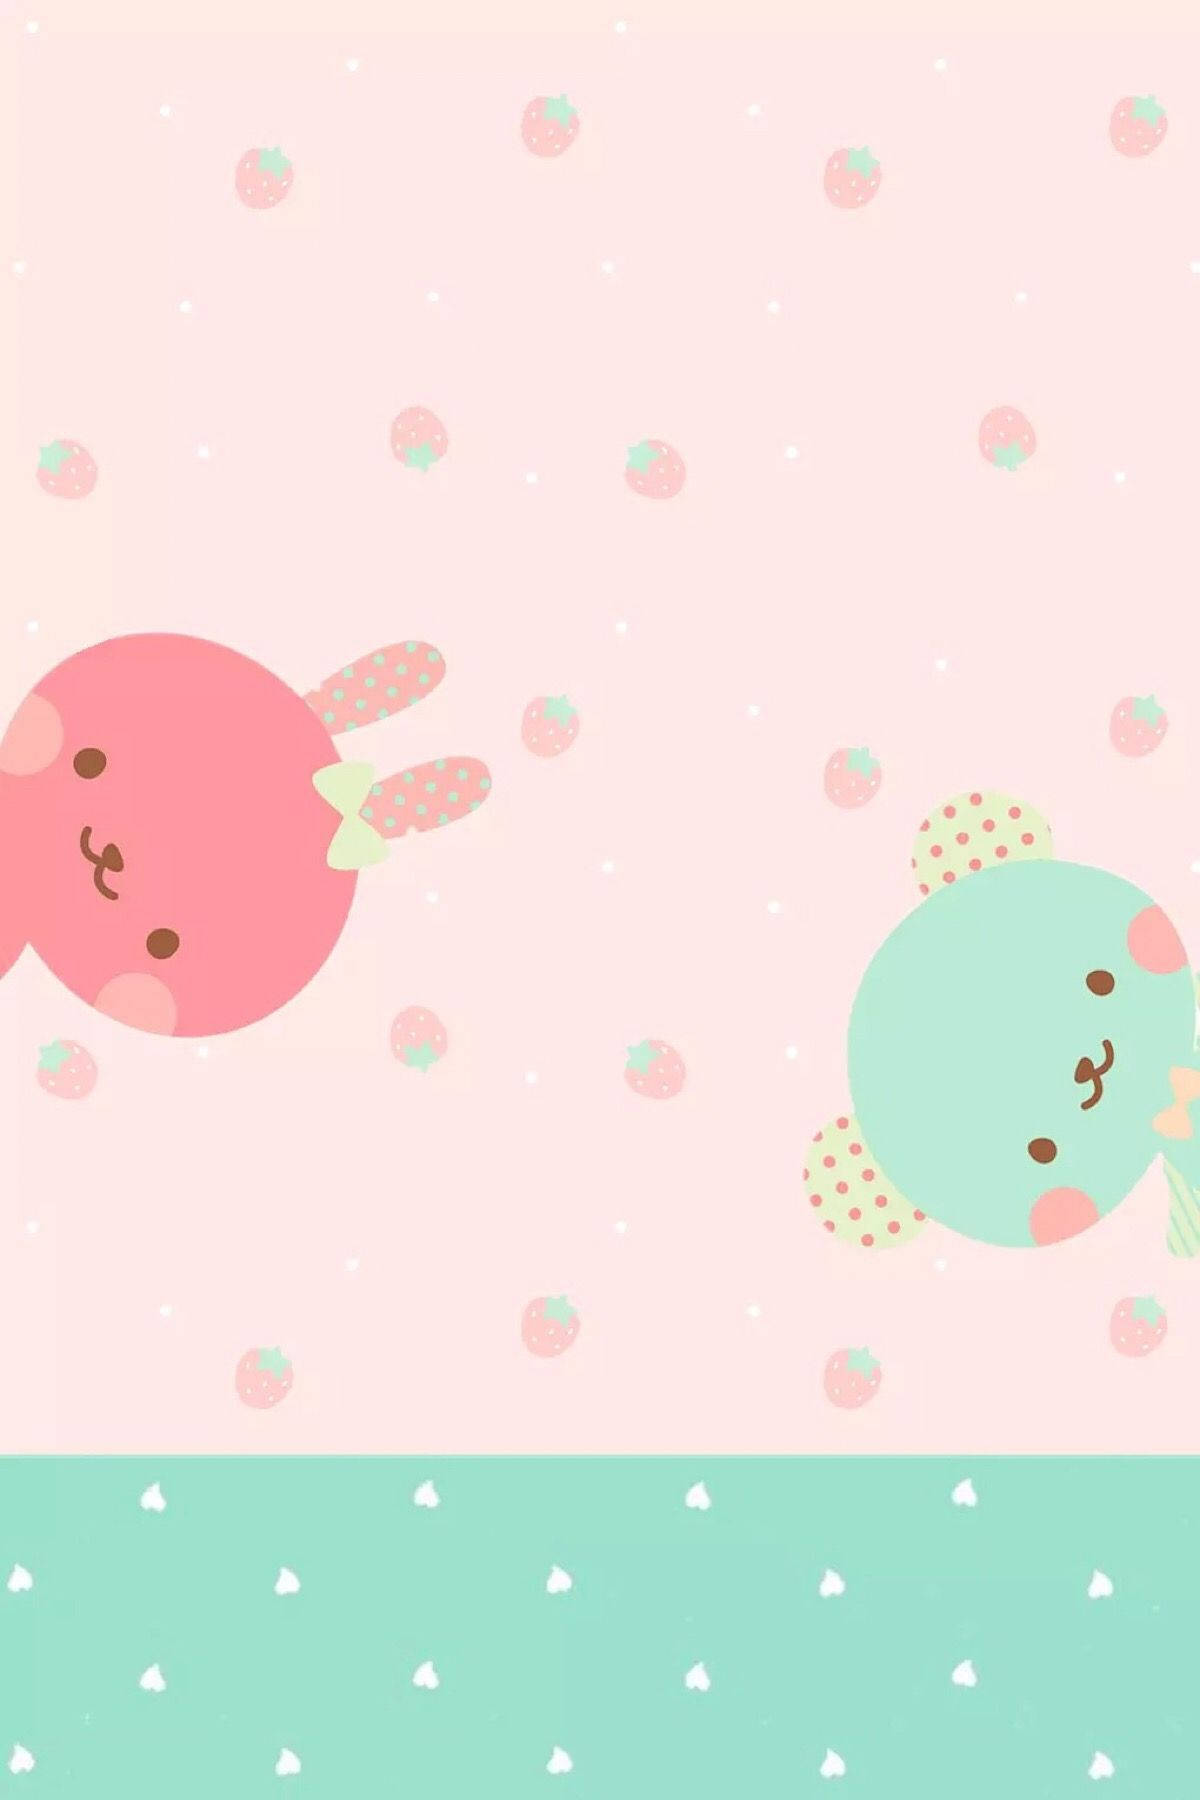 Pink rabbit and green bear peeking on a strawberry-filled background wallpaper.